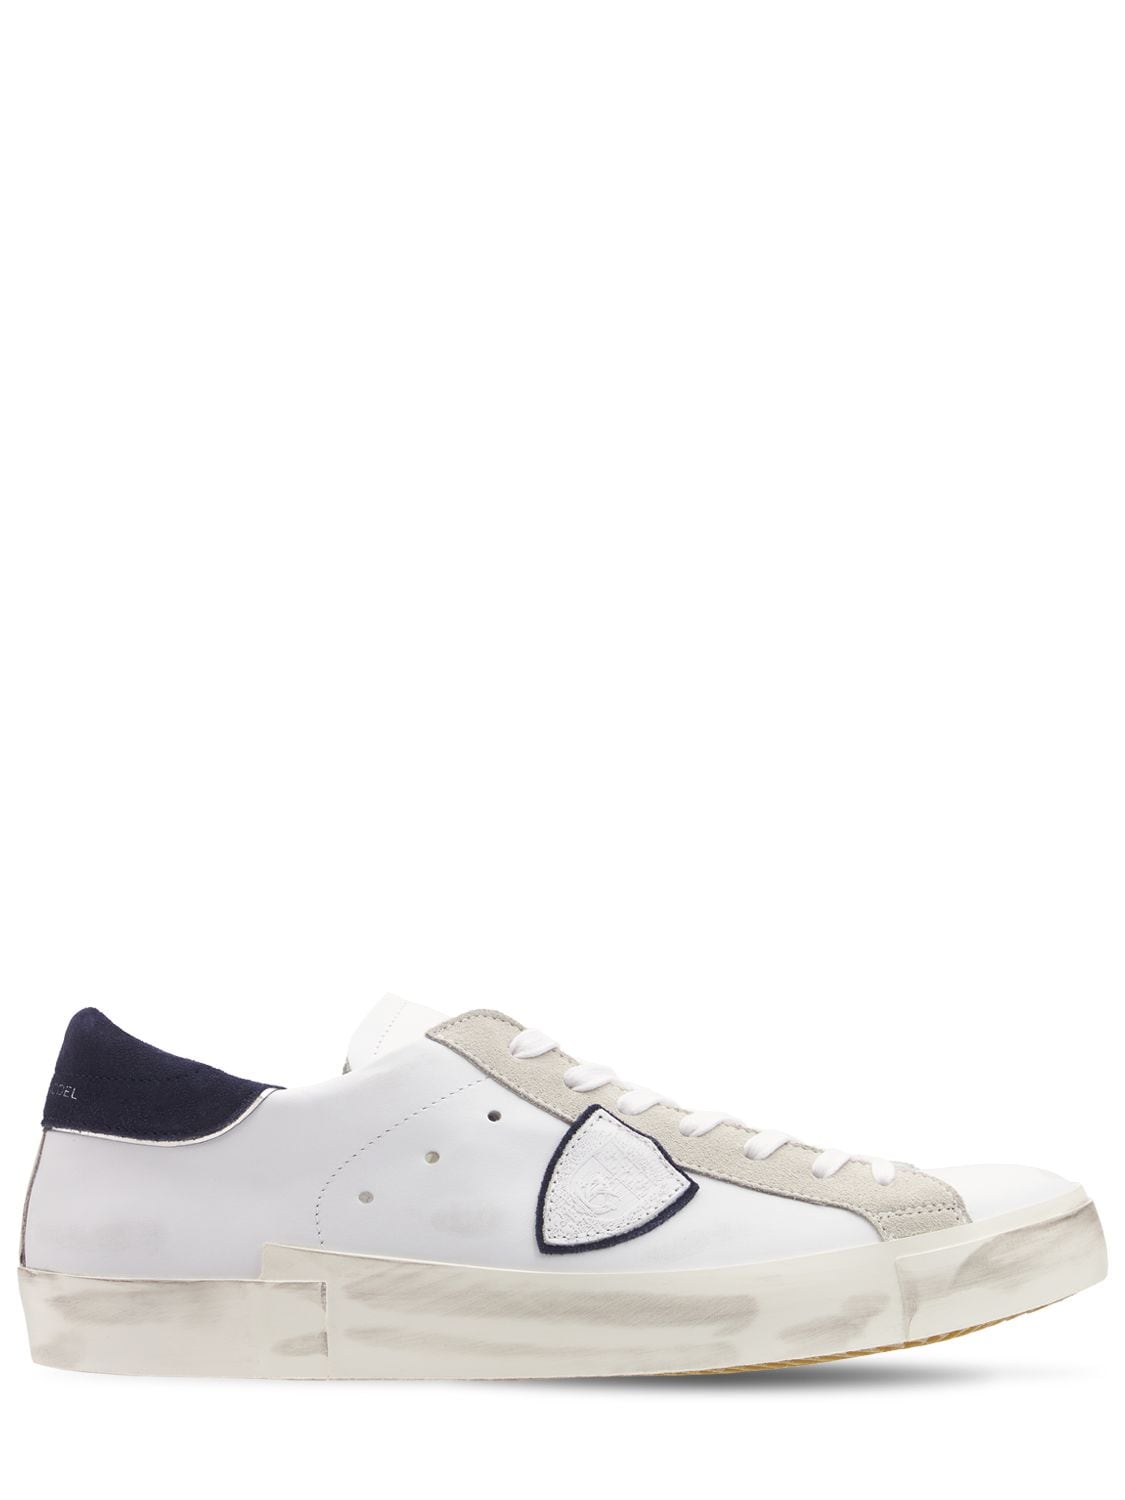 Philippe Model Prsx Veau Broderie Leather Sneakers In White | ModeSens